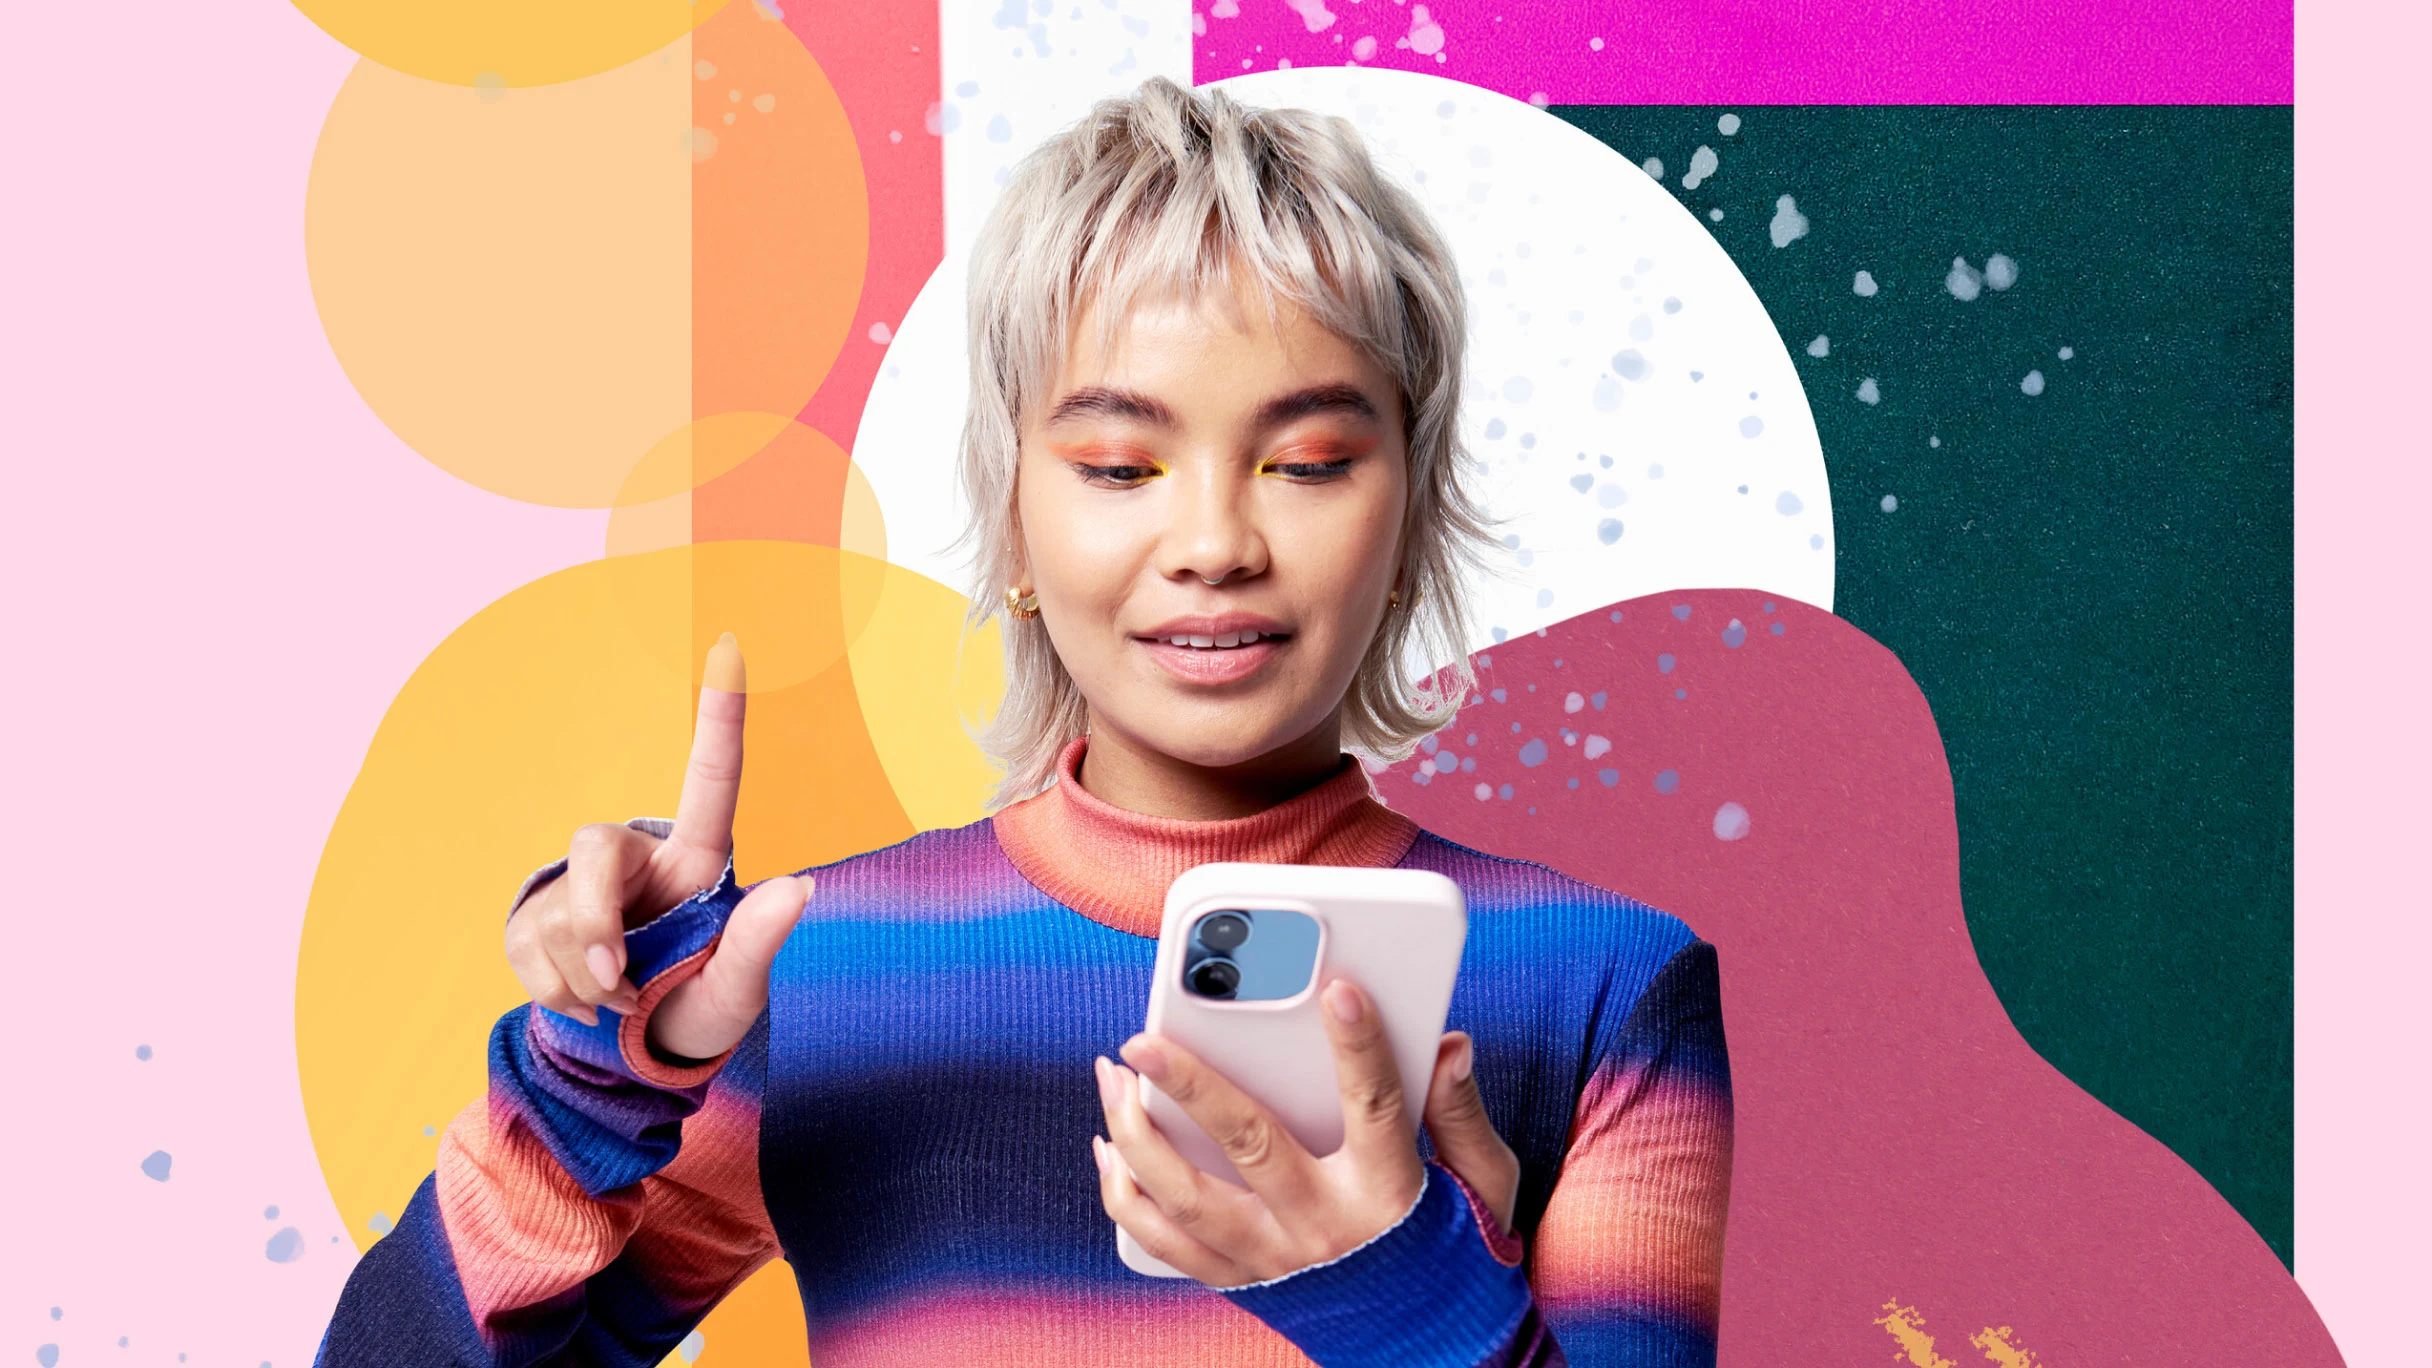 A woman with short blond hair in a bright striped top, is holding and looking at her phone in one hand and pointing upwards with her other hand on a very colourful and abstract background.